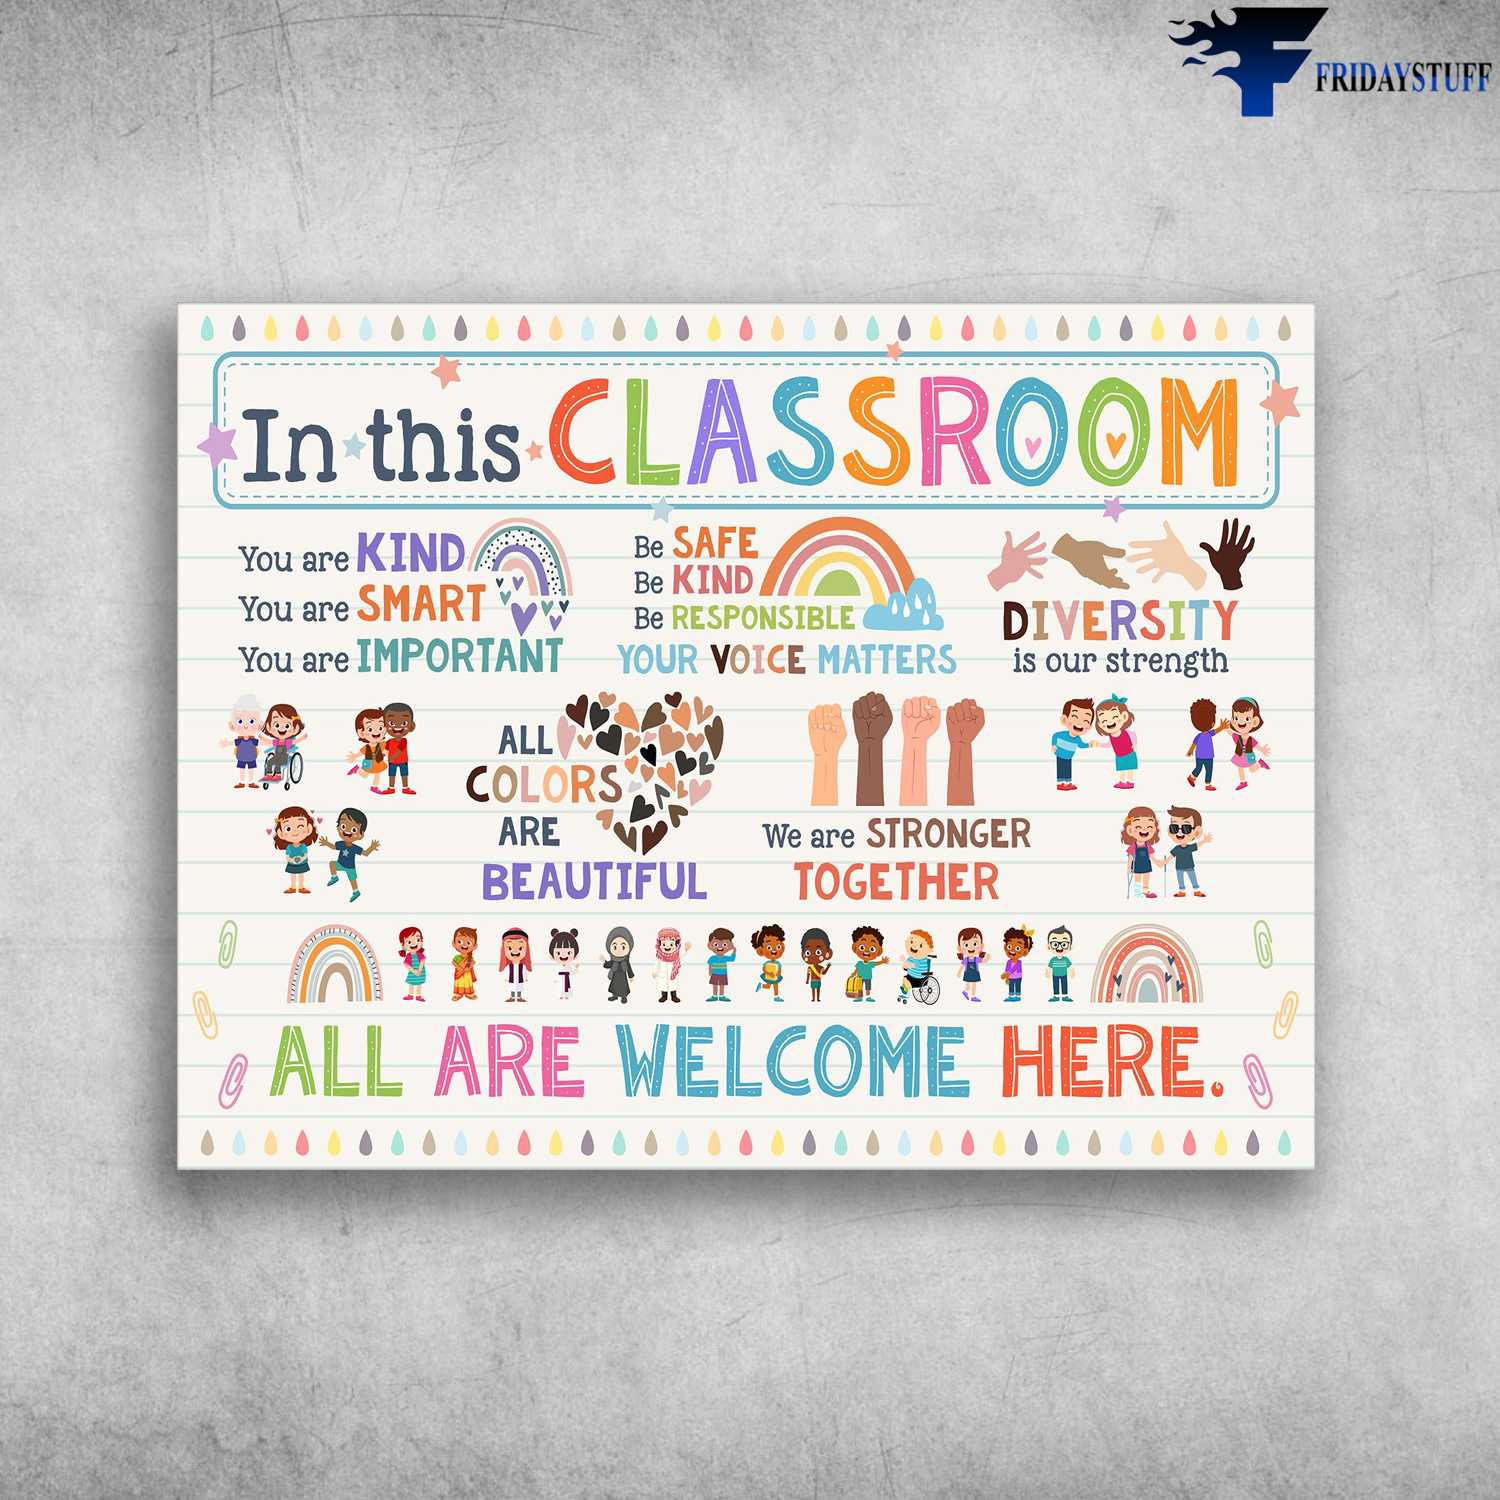 Classroom Rules - In This Classroom, You Are Kind, You Are Smart, You Are Inportant, Be Safe, Be Kind, Be Responsible, Your Voice Matters